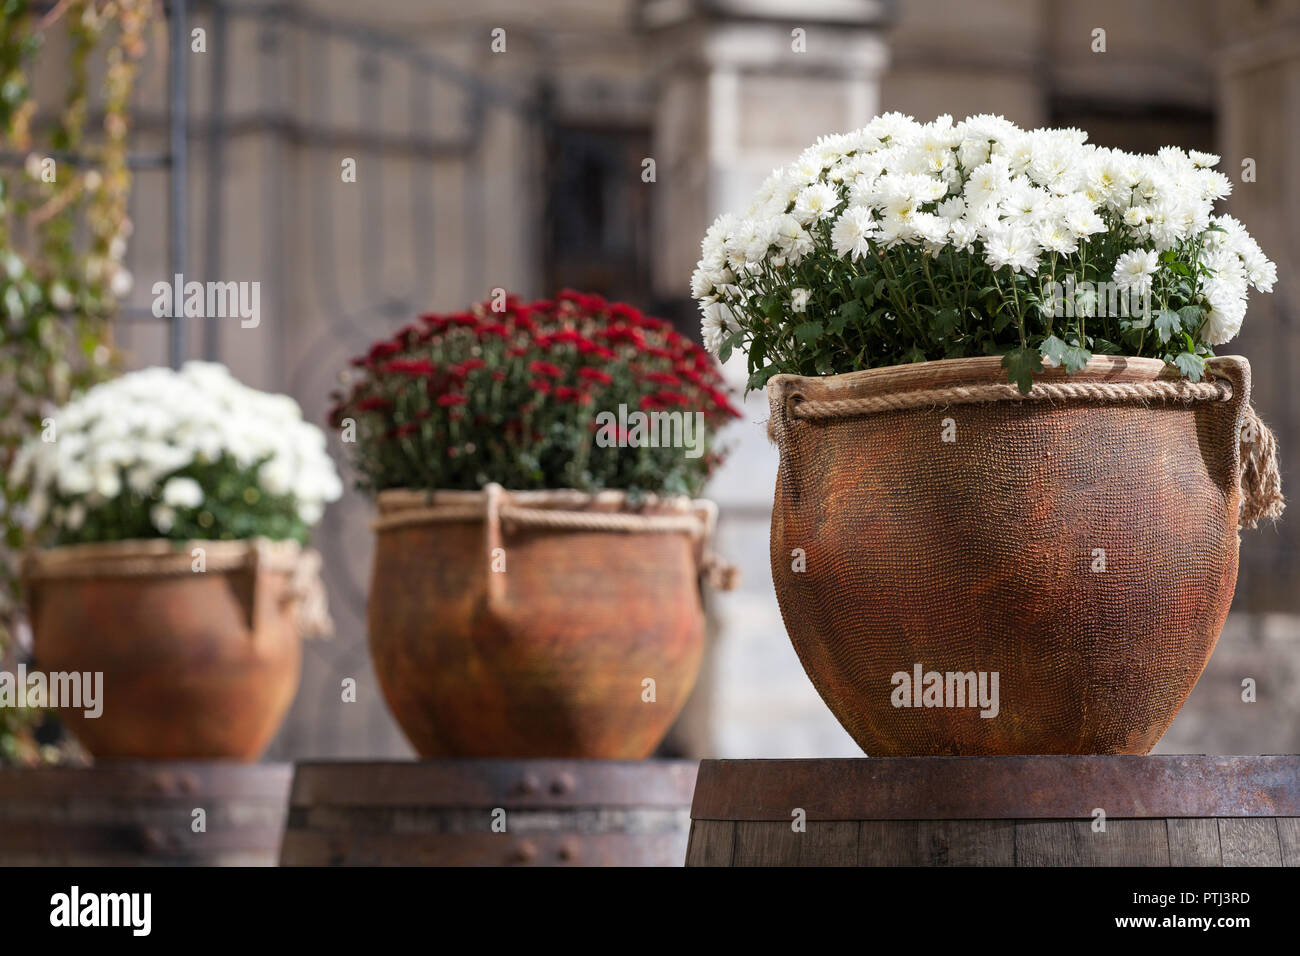 Large flower pots with white and burgundy chrysanthemums. Vases with flowers stand on wooden barrels. Sale of flowers Stock Photo